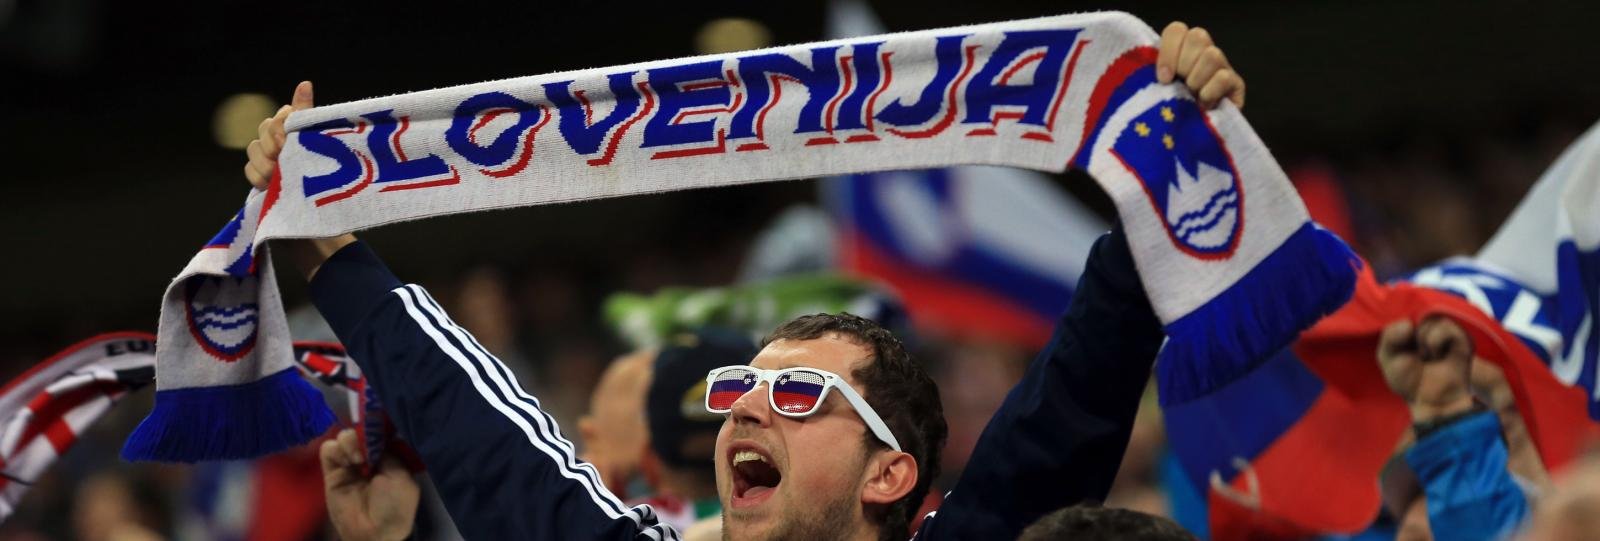 10 facts you (probably) didn’t know about England’s opponents Slovenia